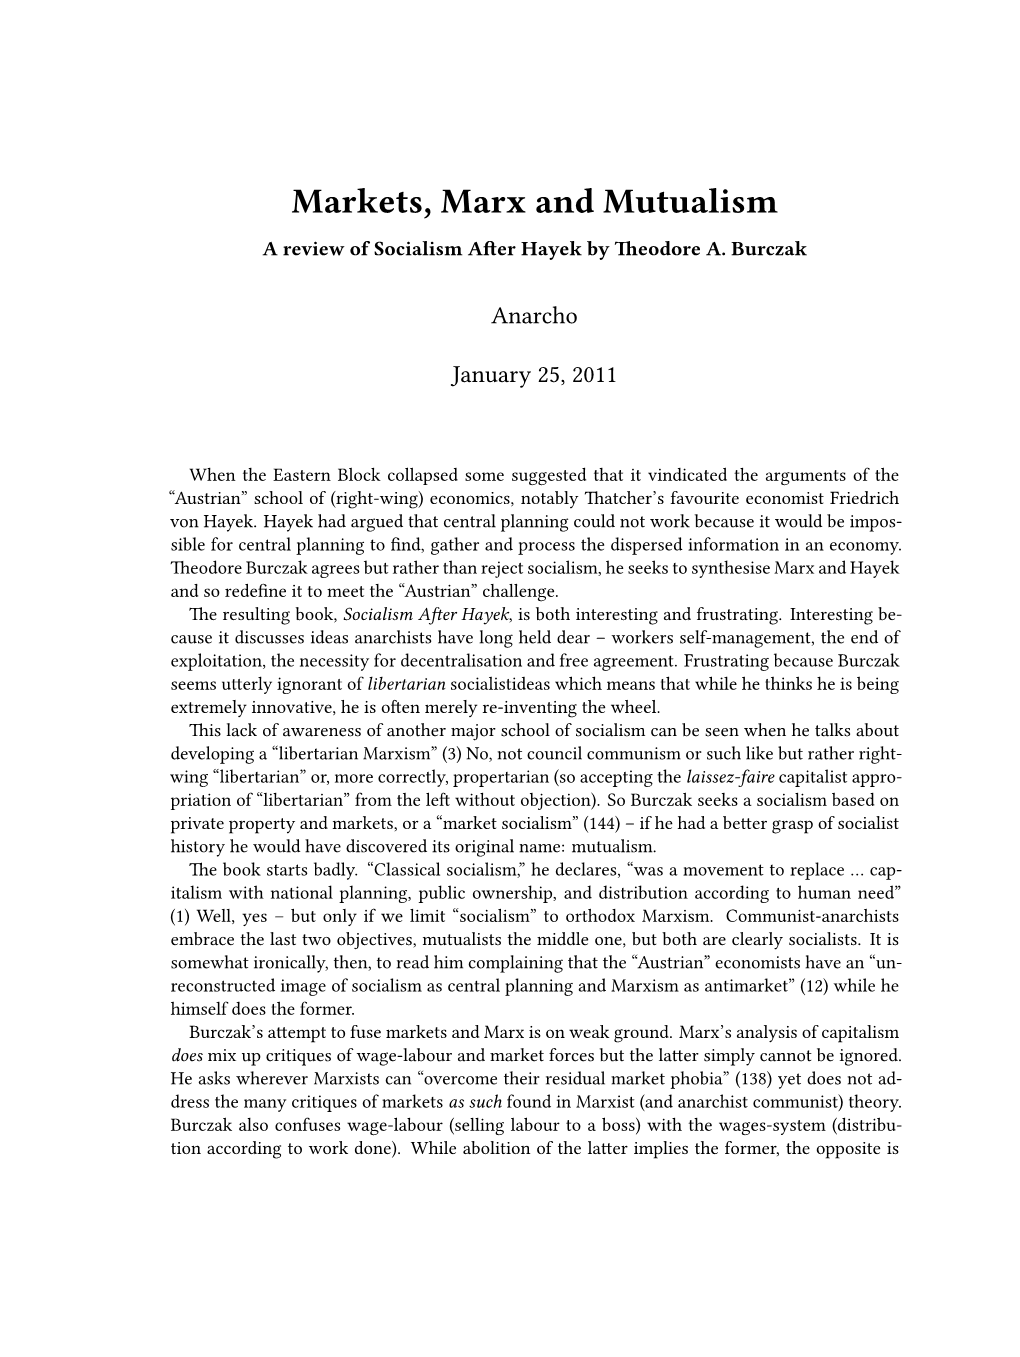 Markets, Marx and Mutualism a Review of Socialism After Hayek by Theodore A